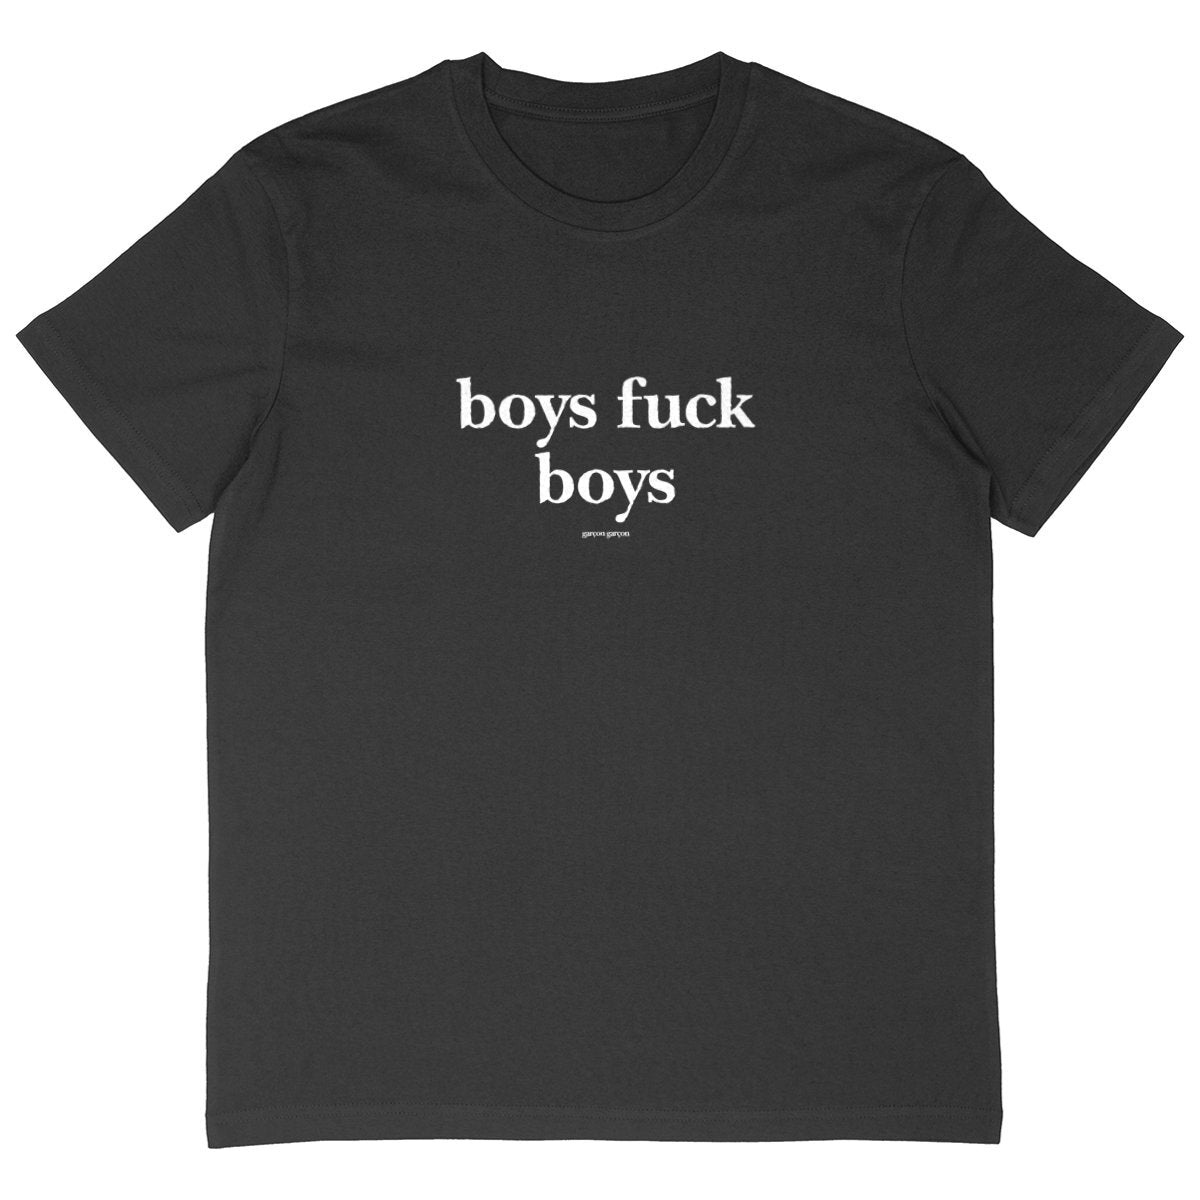 boys fuck boys oversize tee. garçon garçon tee oversize BLACK. Dive into the essence of Parisian cool with this oversized tee. The subtle 'garçon garçon' signature whispers a chic narrative, offering a slice of the city's famed elegance. Perfect for those who speak style with simplicity.